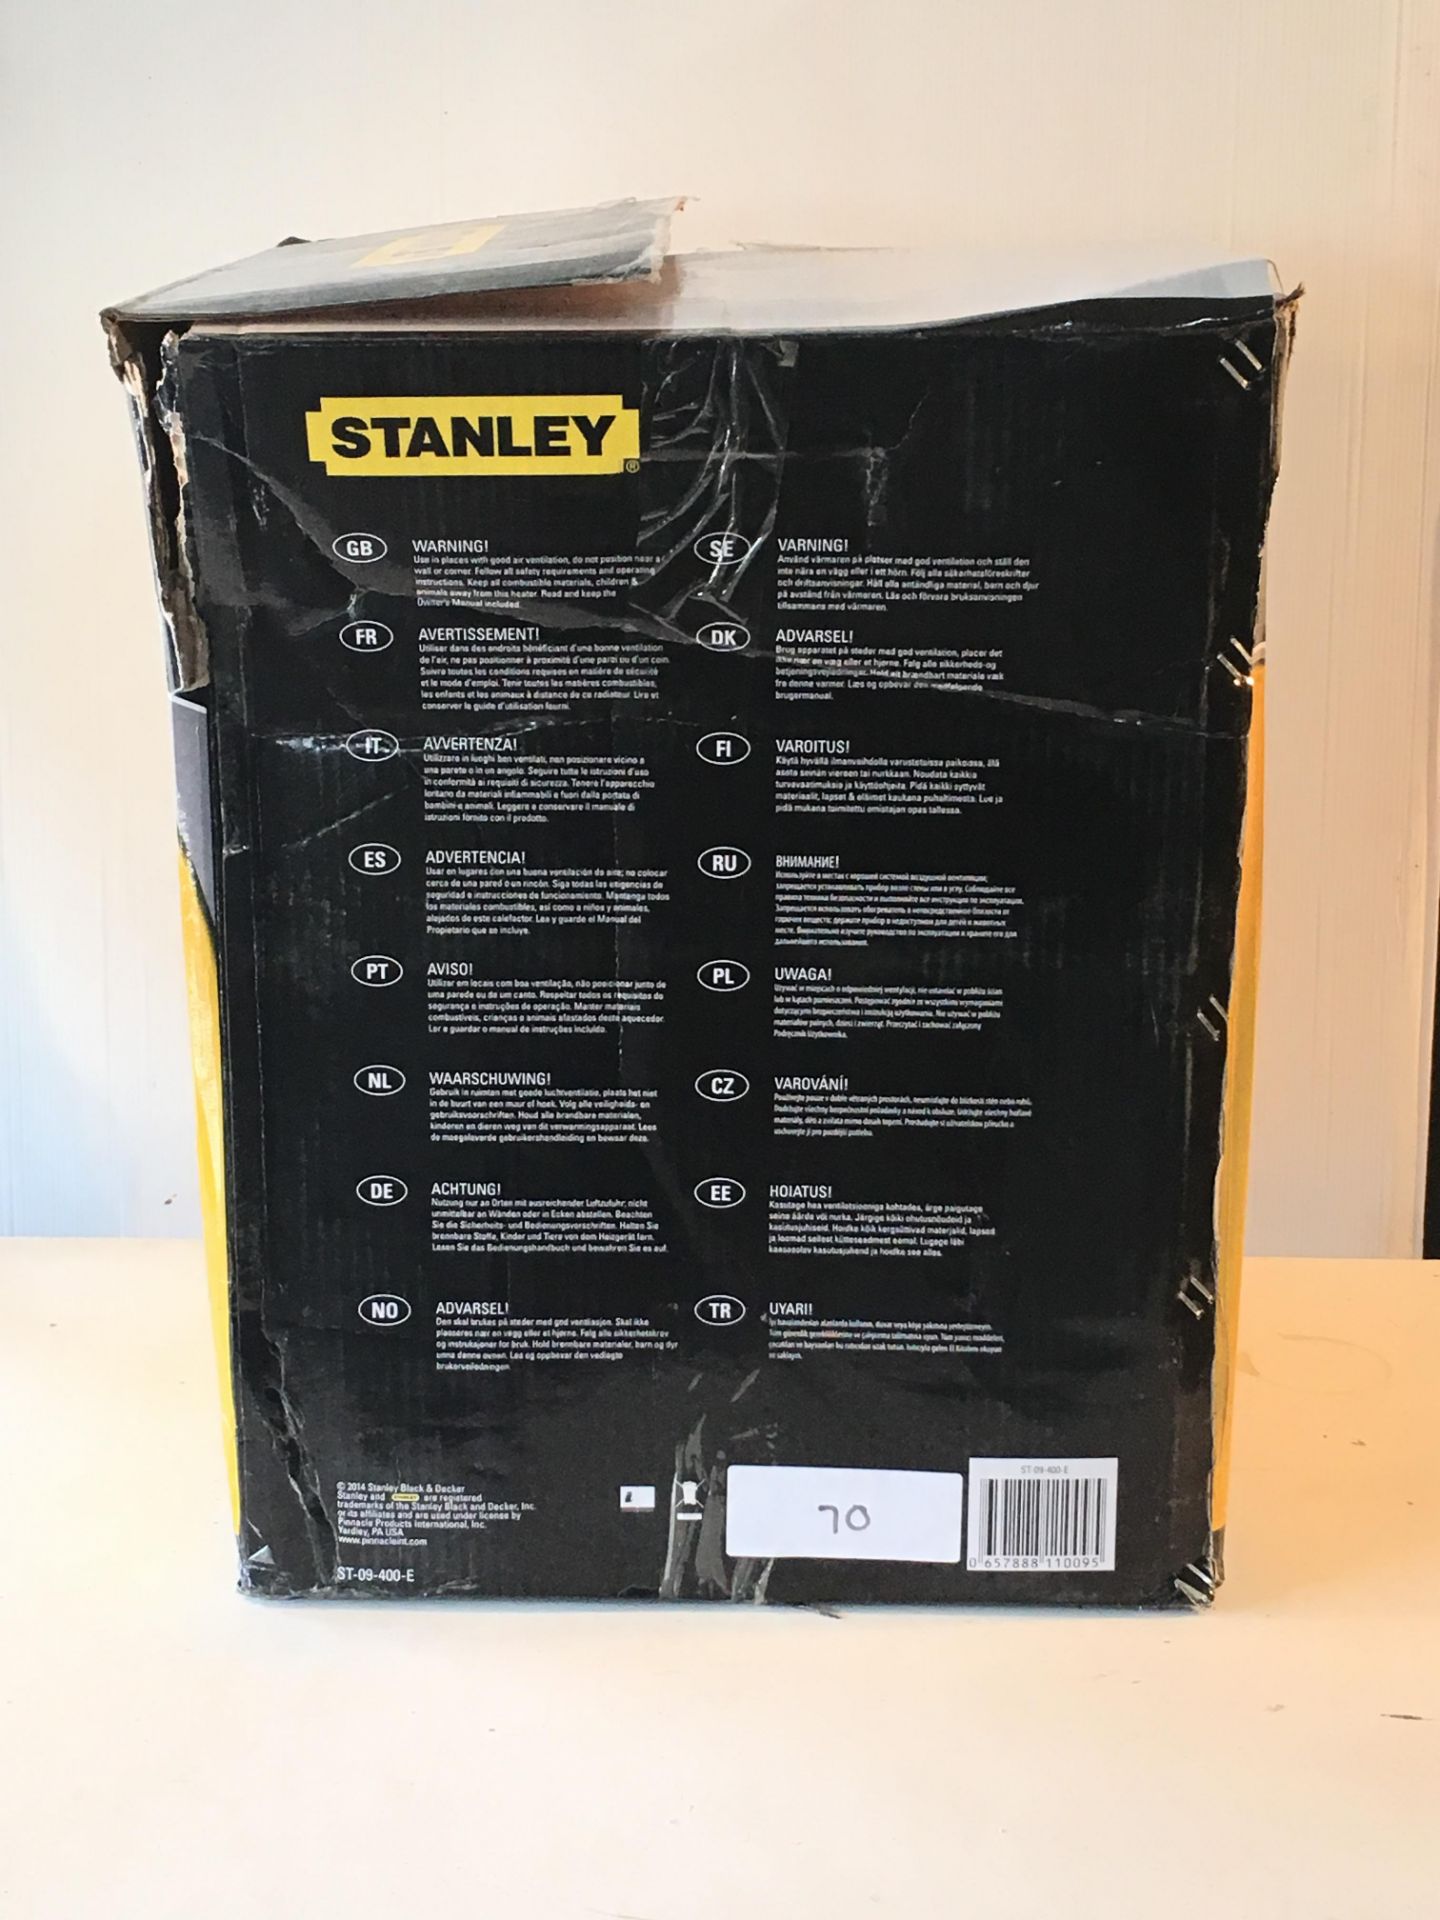 Damaged Box Stanley ST-09-400-E 55/4500/9000W 3 Phase Electric Fan Heater - Image 2 of 8